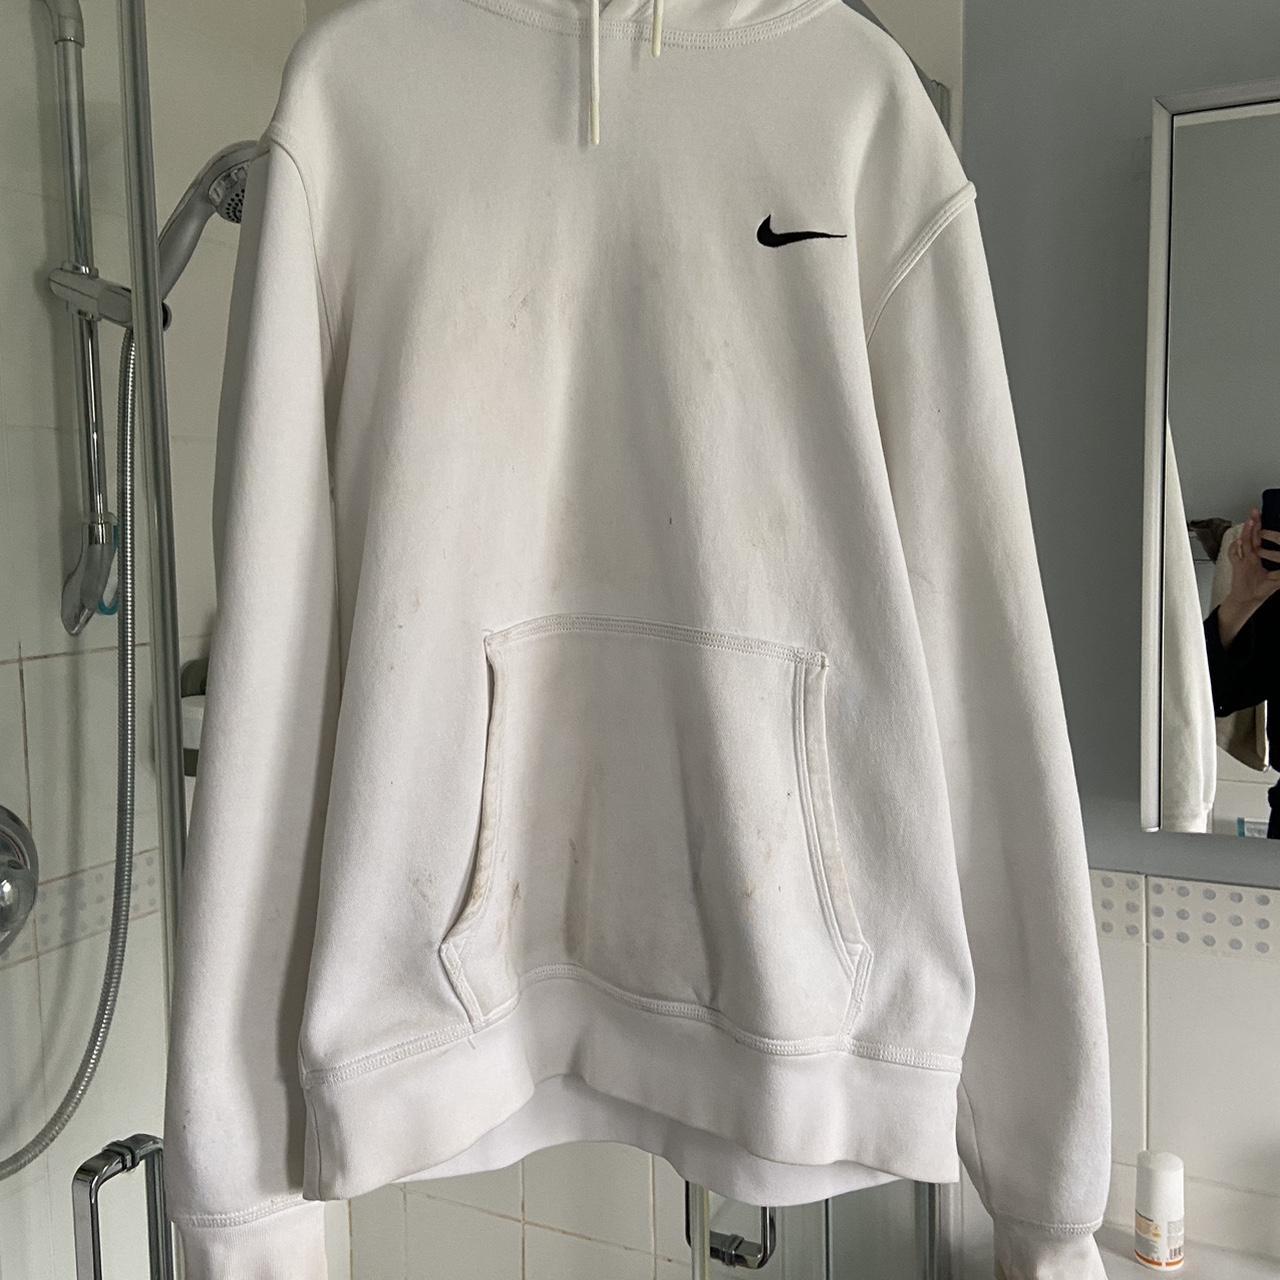 NIKE WHITE HOODIE PHYSICAL CONDITION IS PERFECT, no... - Depop